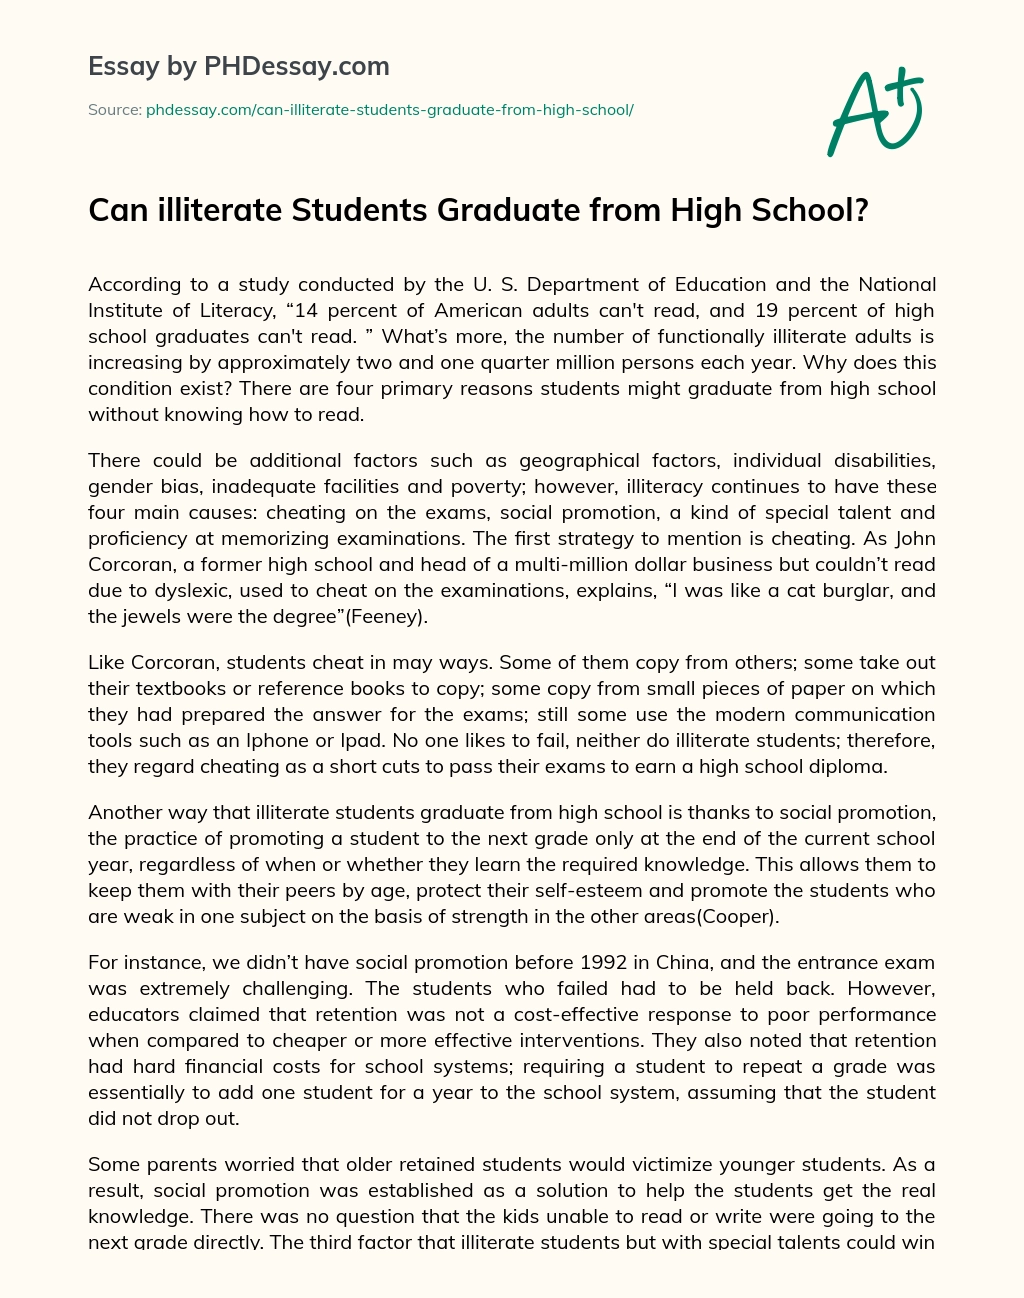 Can illiterate Students Graduate from High School? essay